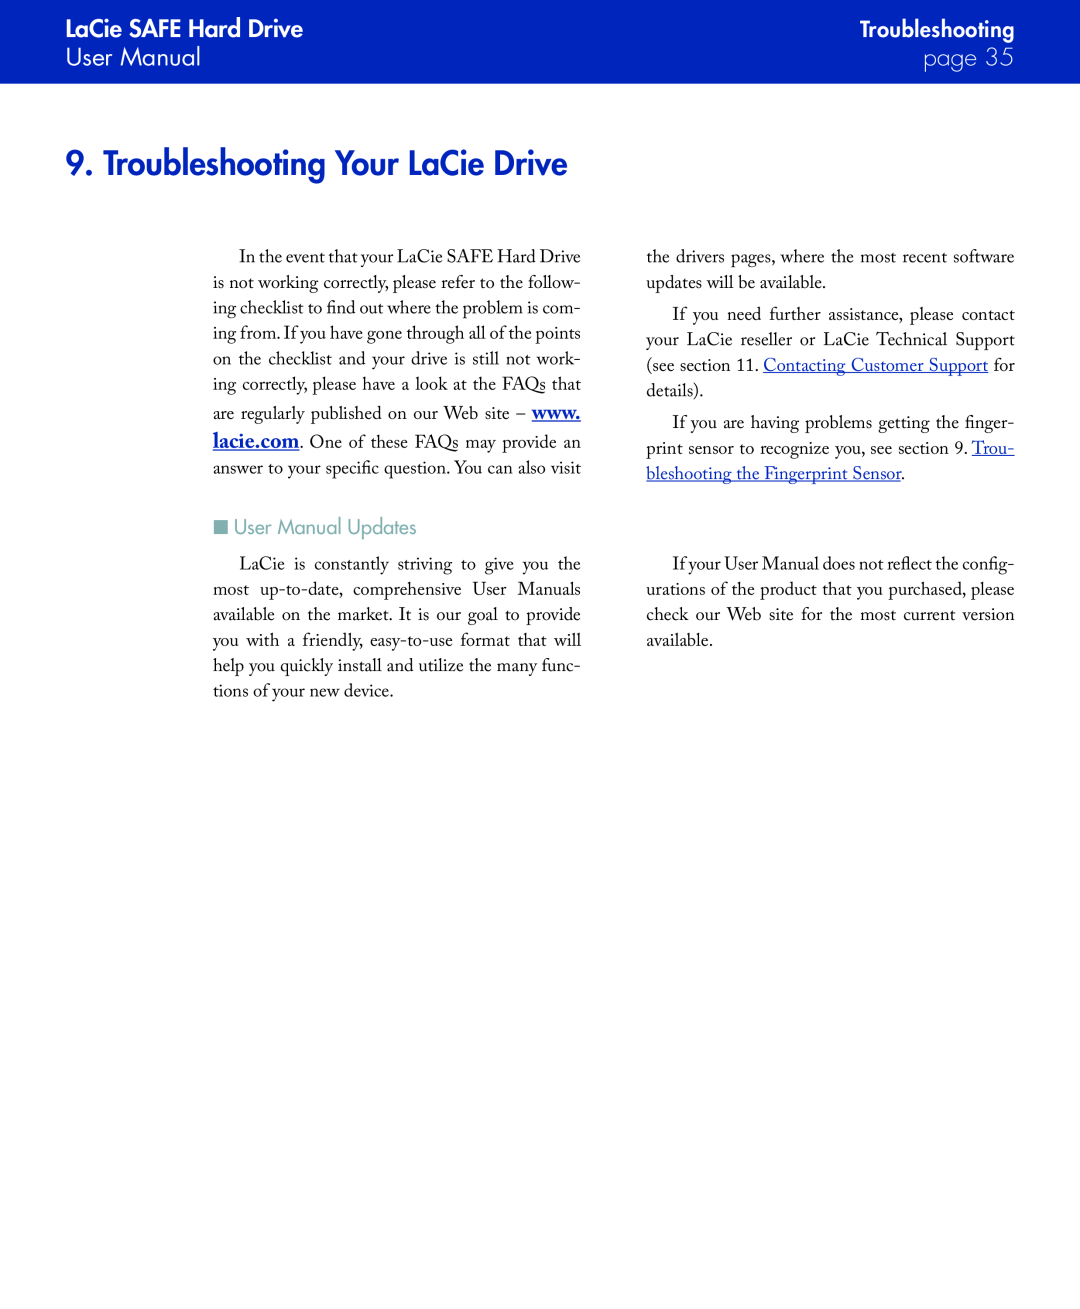 LaCie manual Troubleshooting Your LaCie Drive, n User Manual Updates, LaCie SAFE Hard Drive, page 